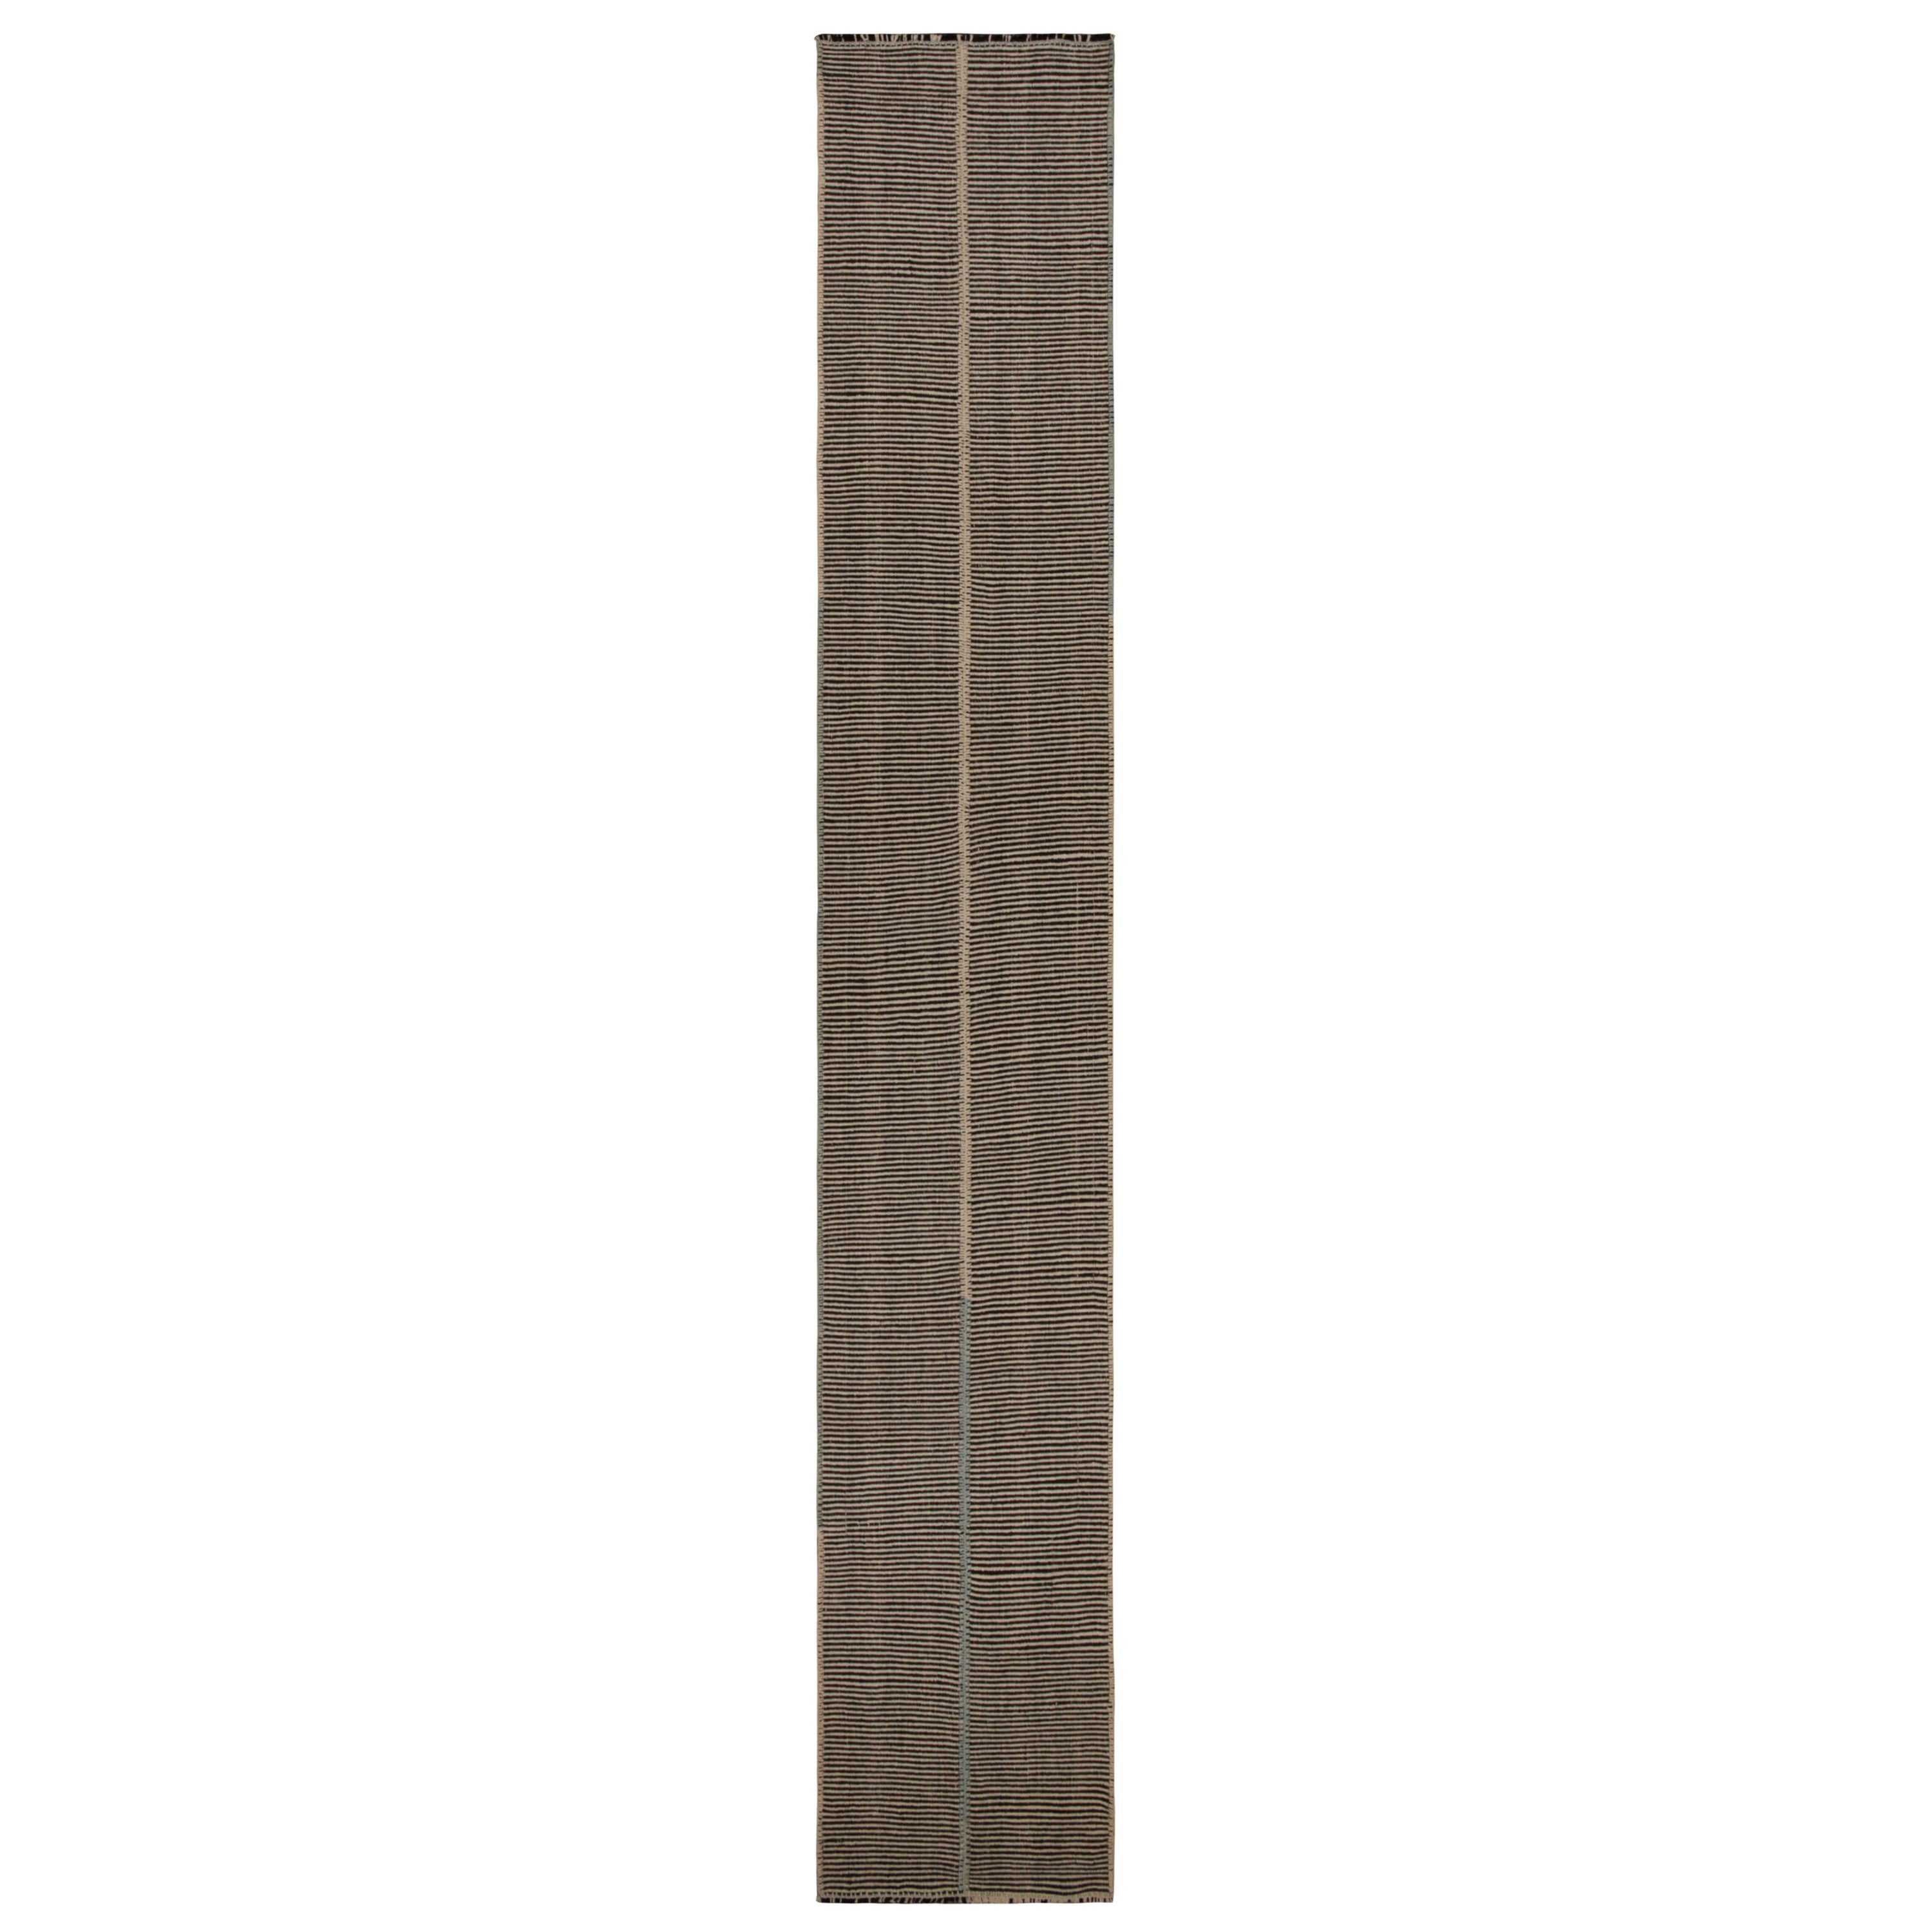 Rug & Kilim’s Contemporary Kilim Extra-Long Runner Rug, in Beige and Black